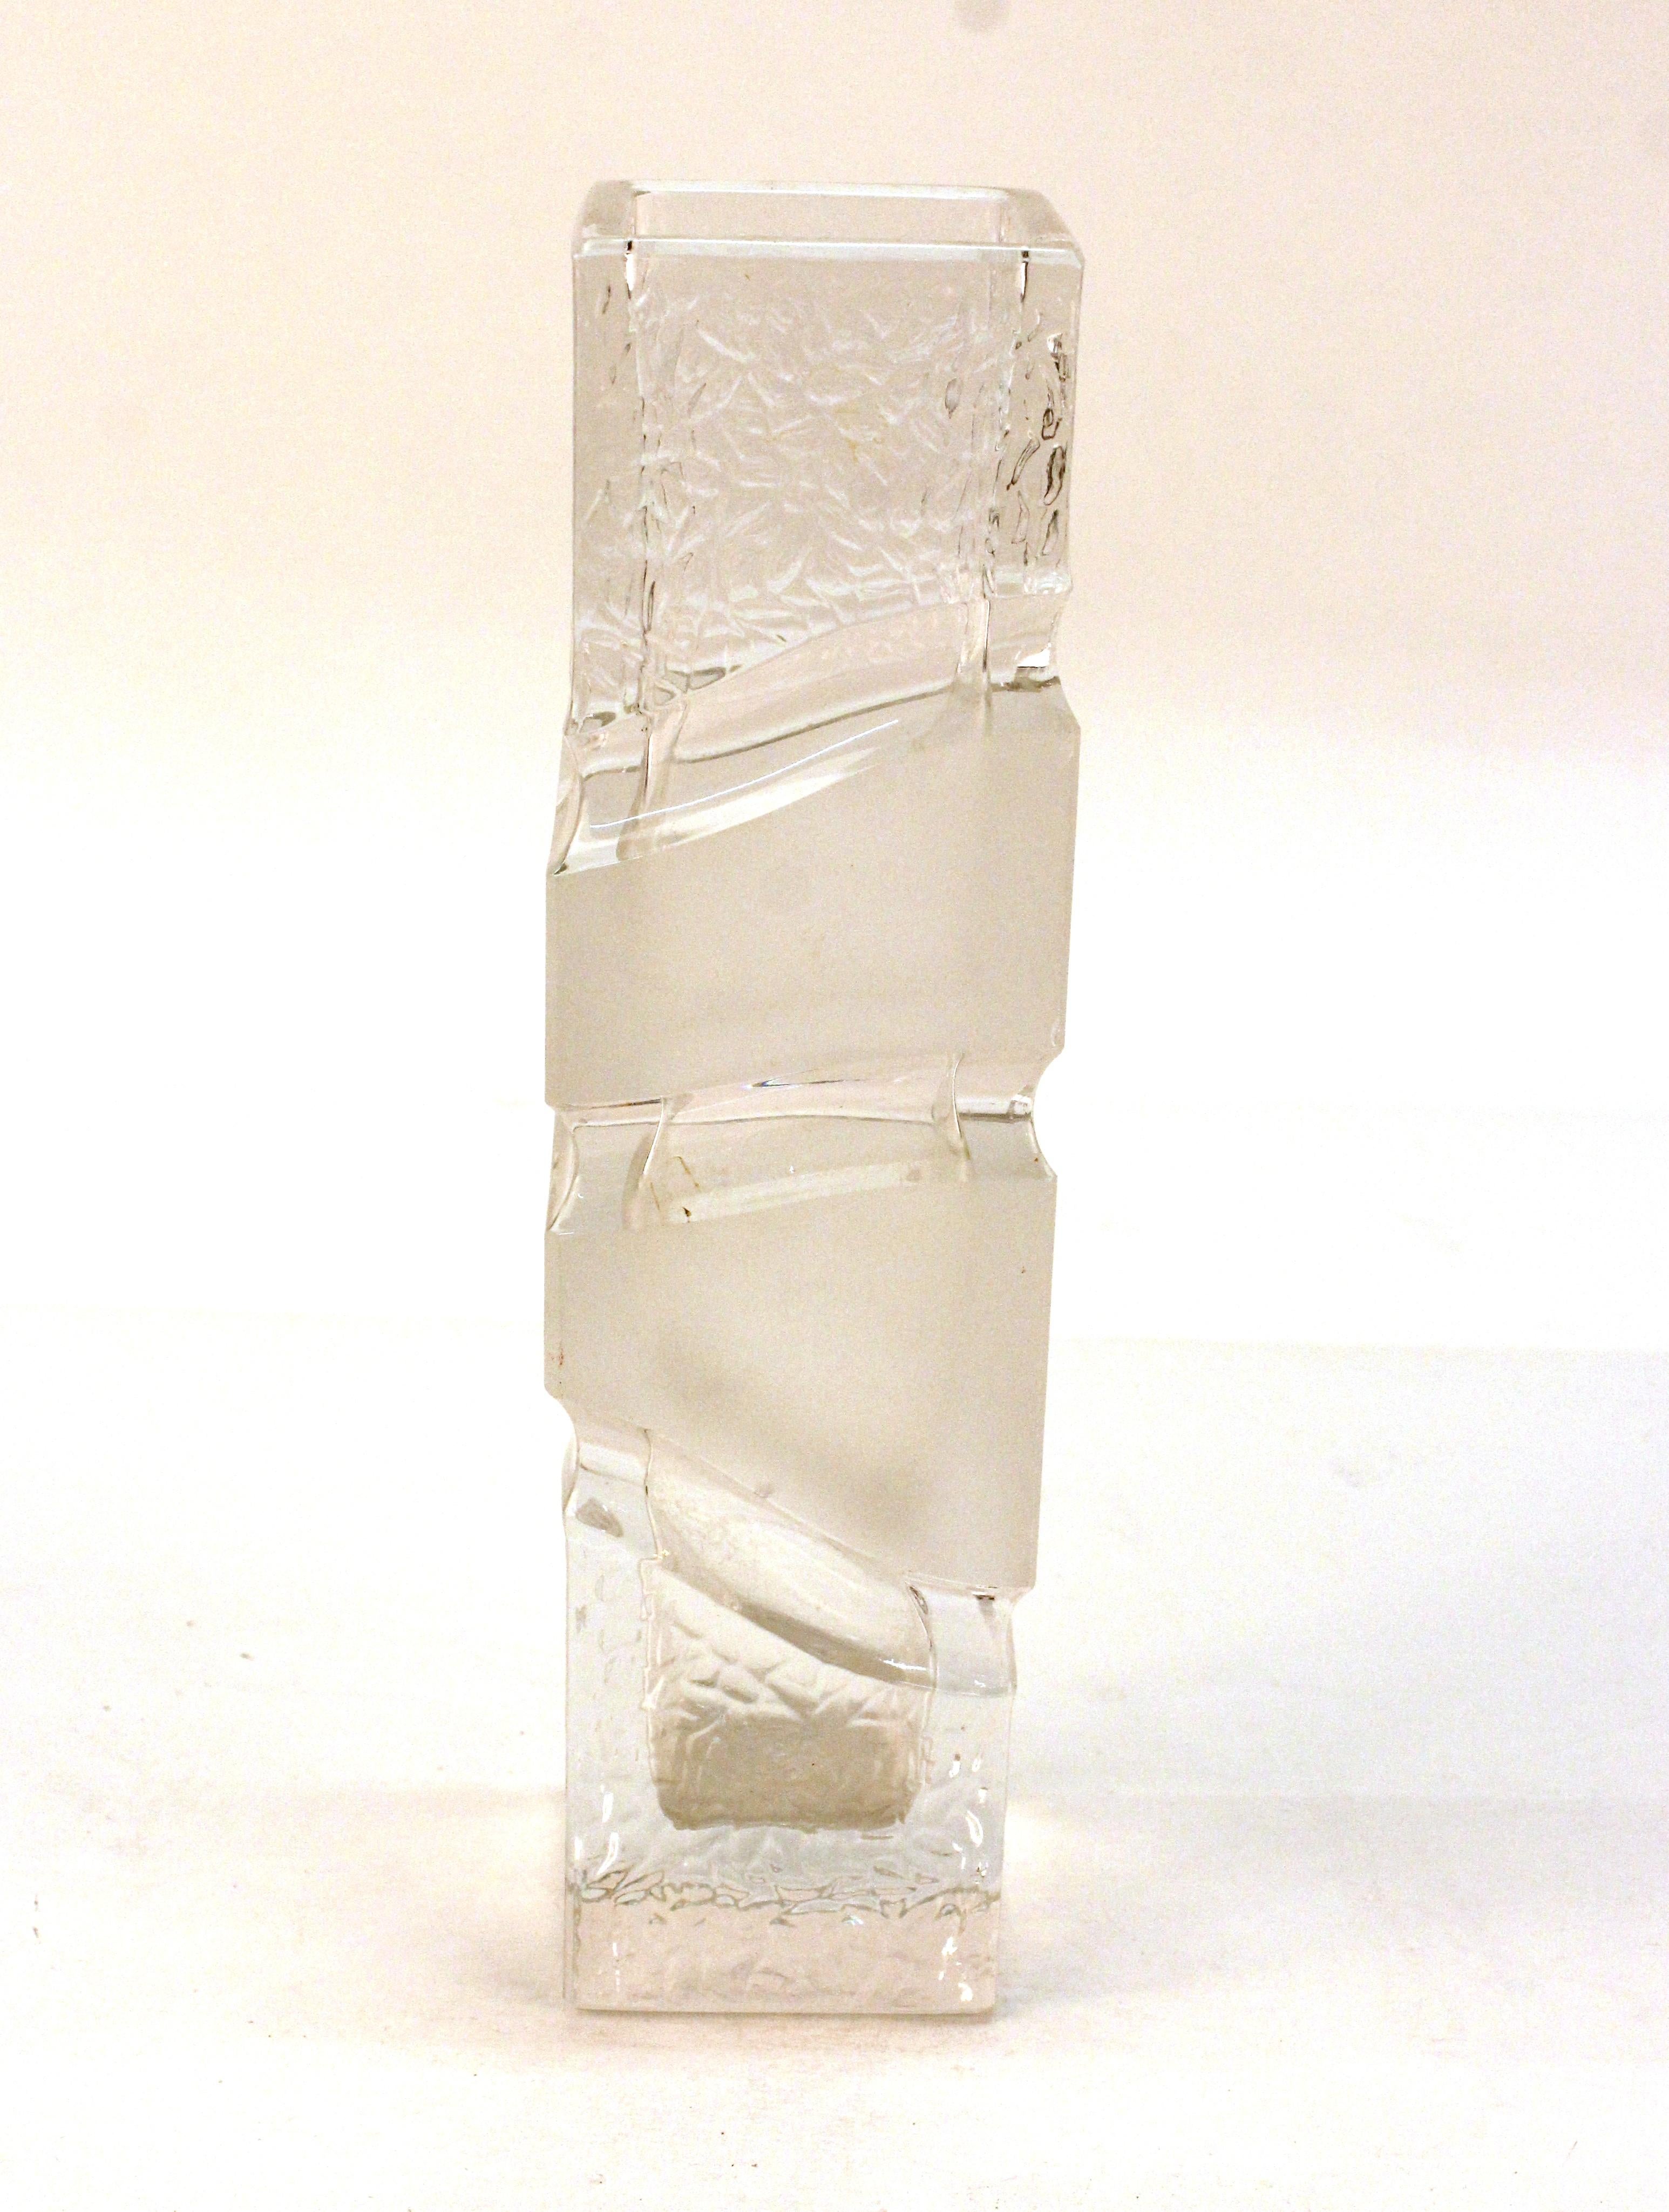 Modern style heavy glass vase with a square base and a wave-like motif in partly opaque glass. The piece has age-appropriate wear to the bottom and is in great vintage condition.